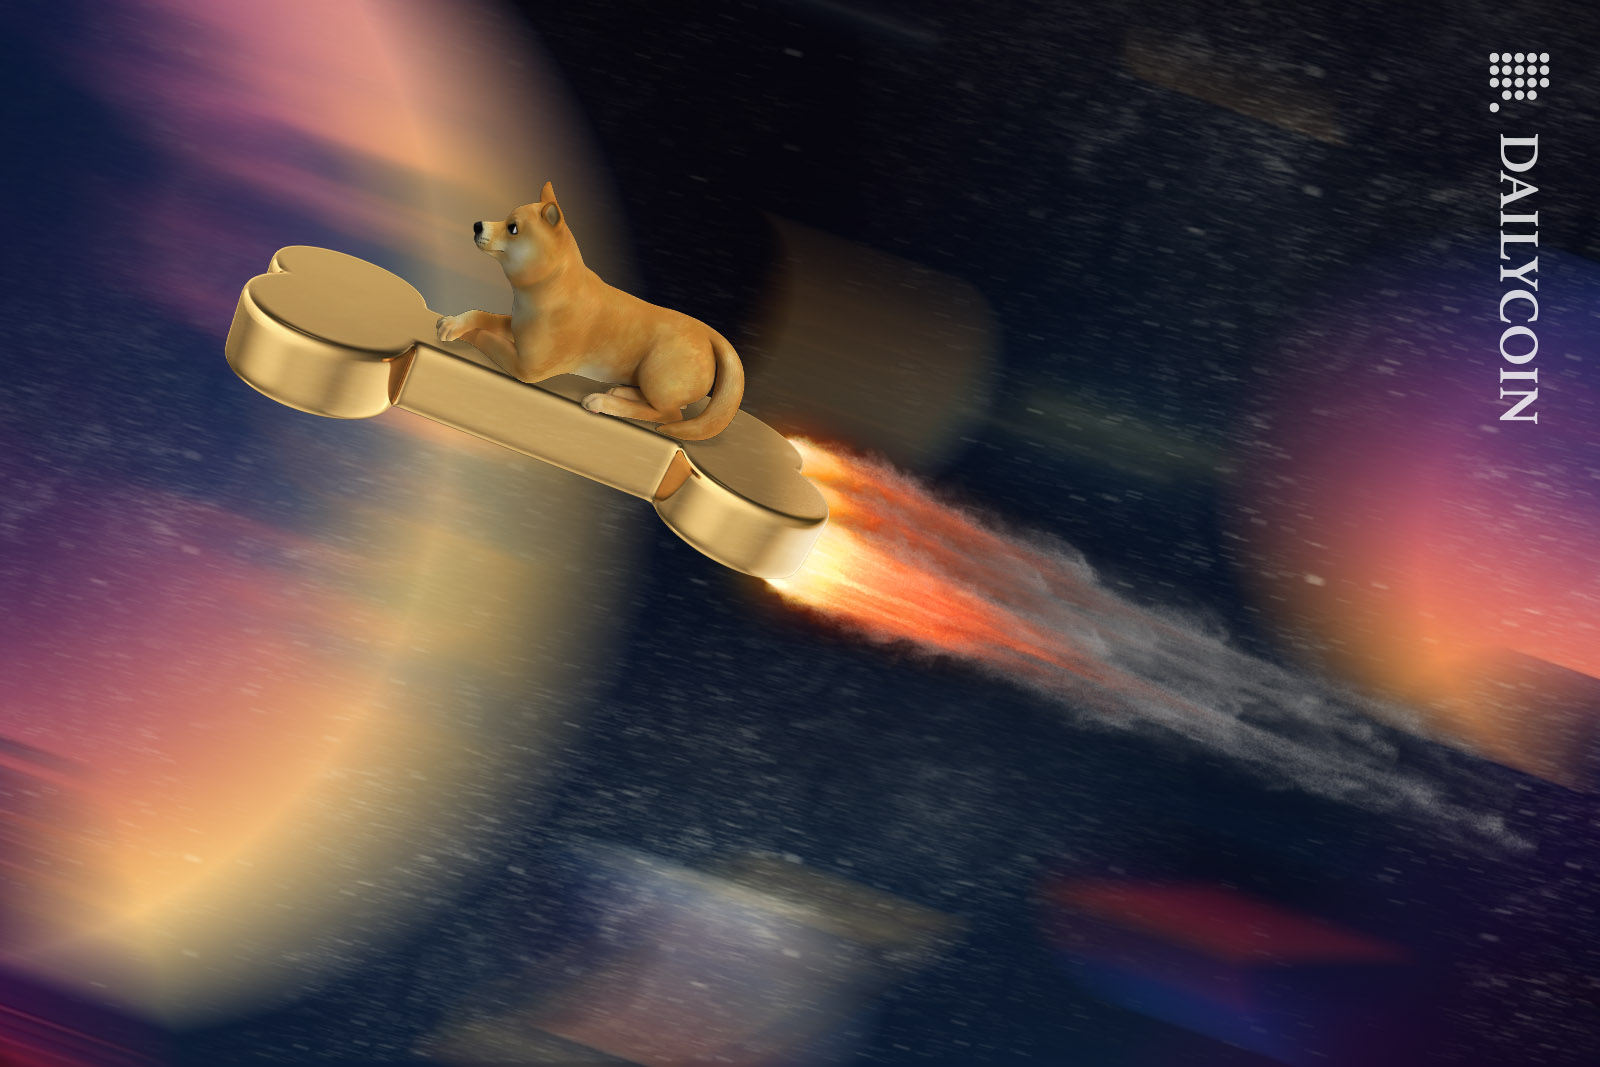 Shiba Inu riding a golden bone with high speed in space.